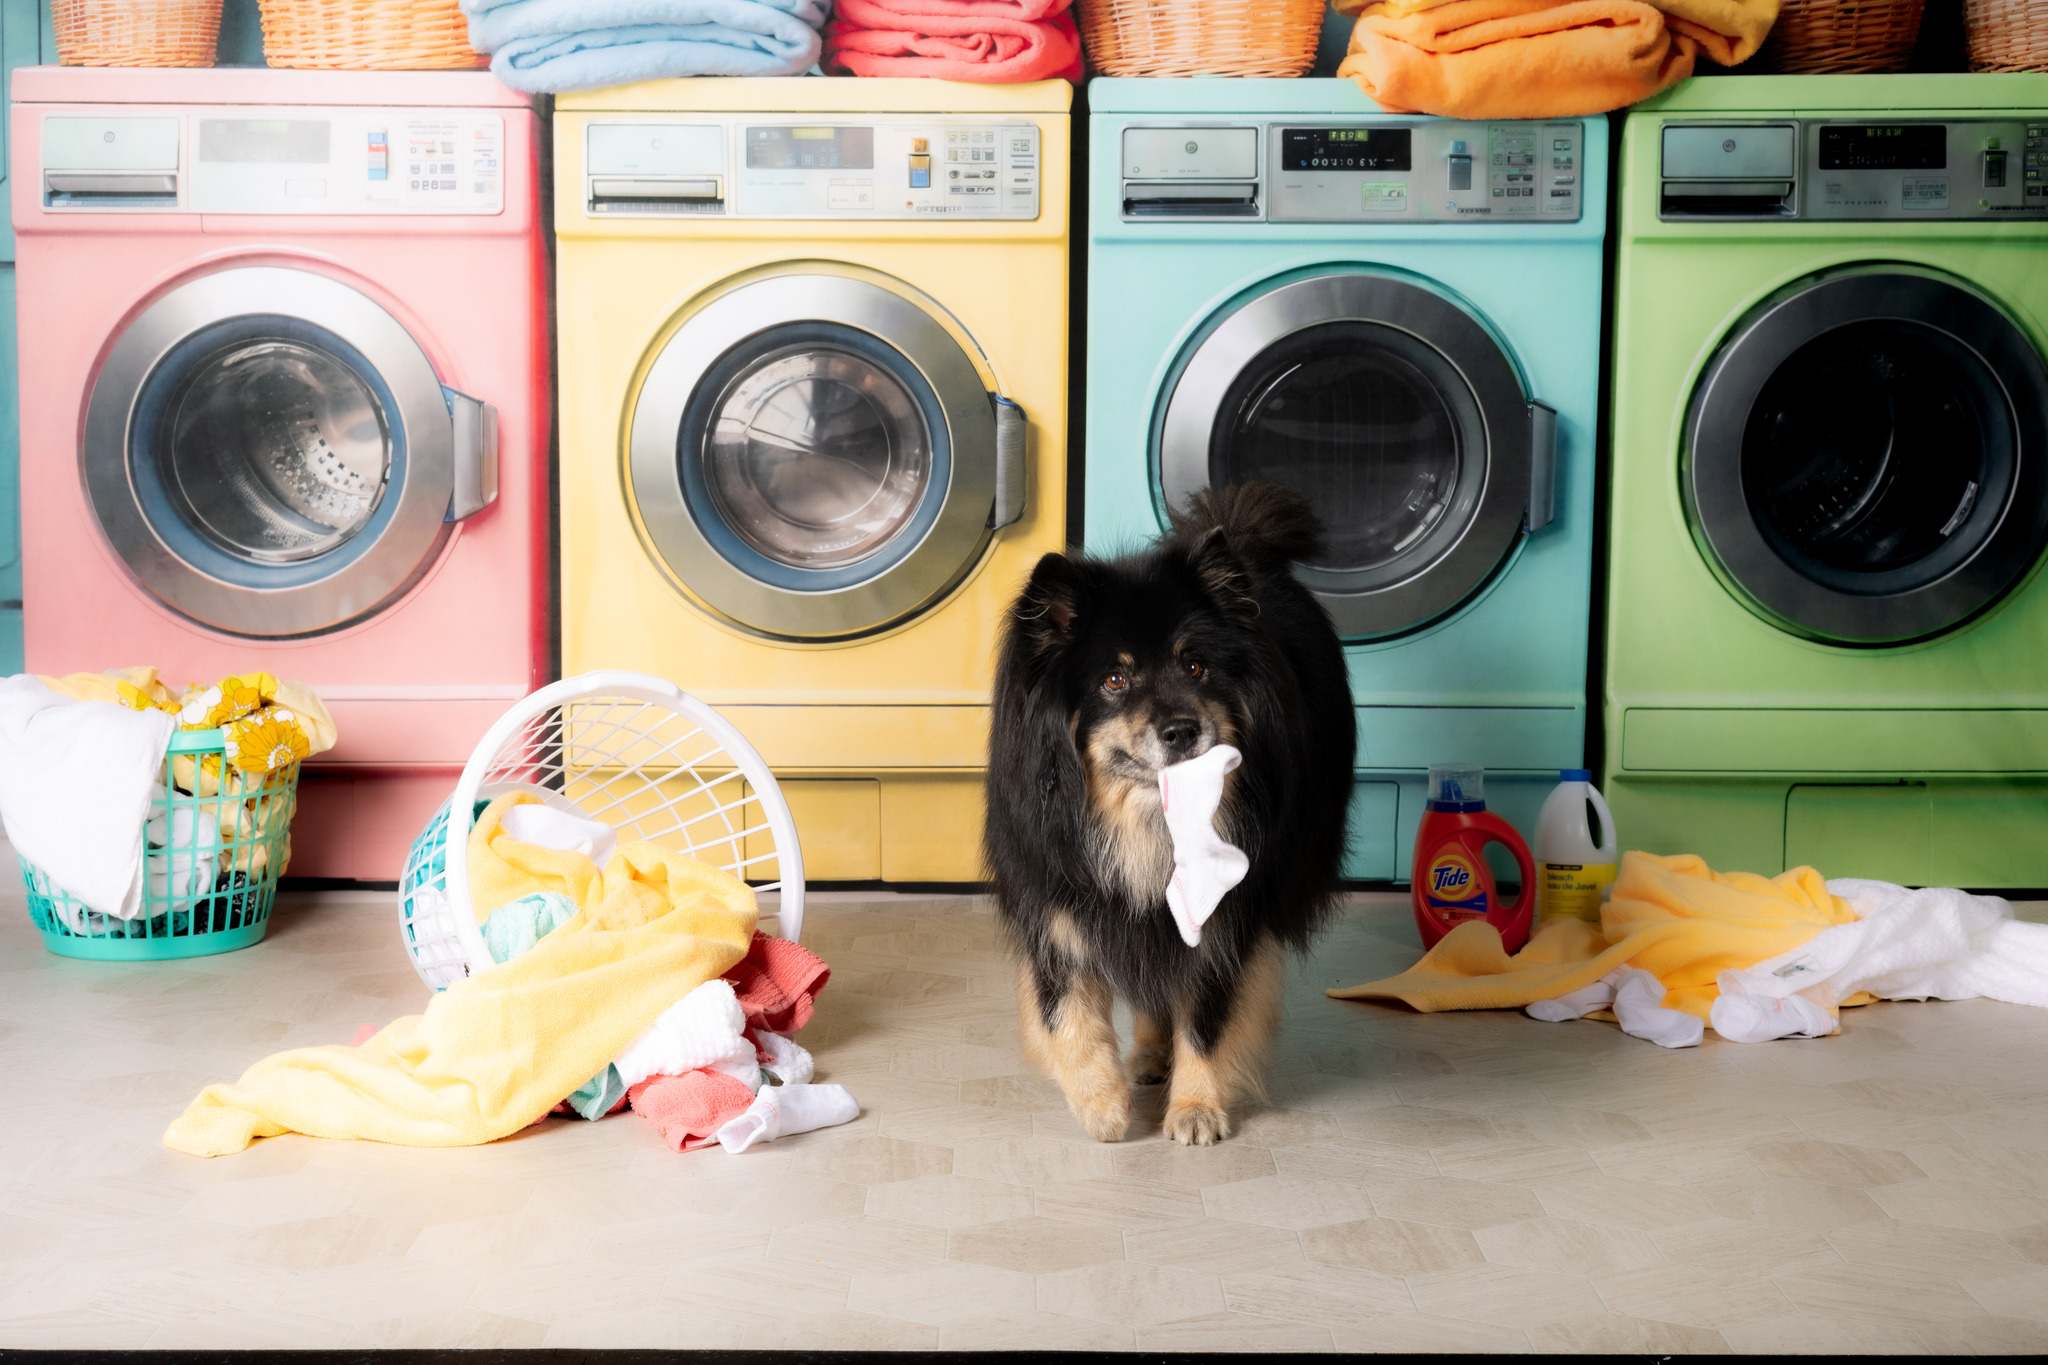 Dog with sock in mouth in front of washing machine backdrop